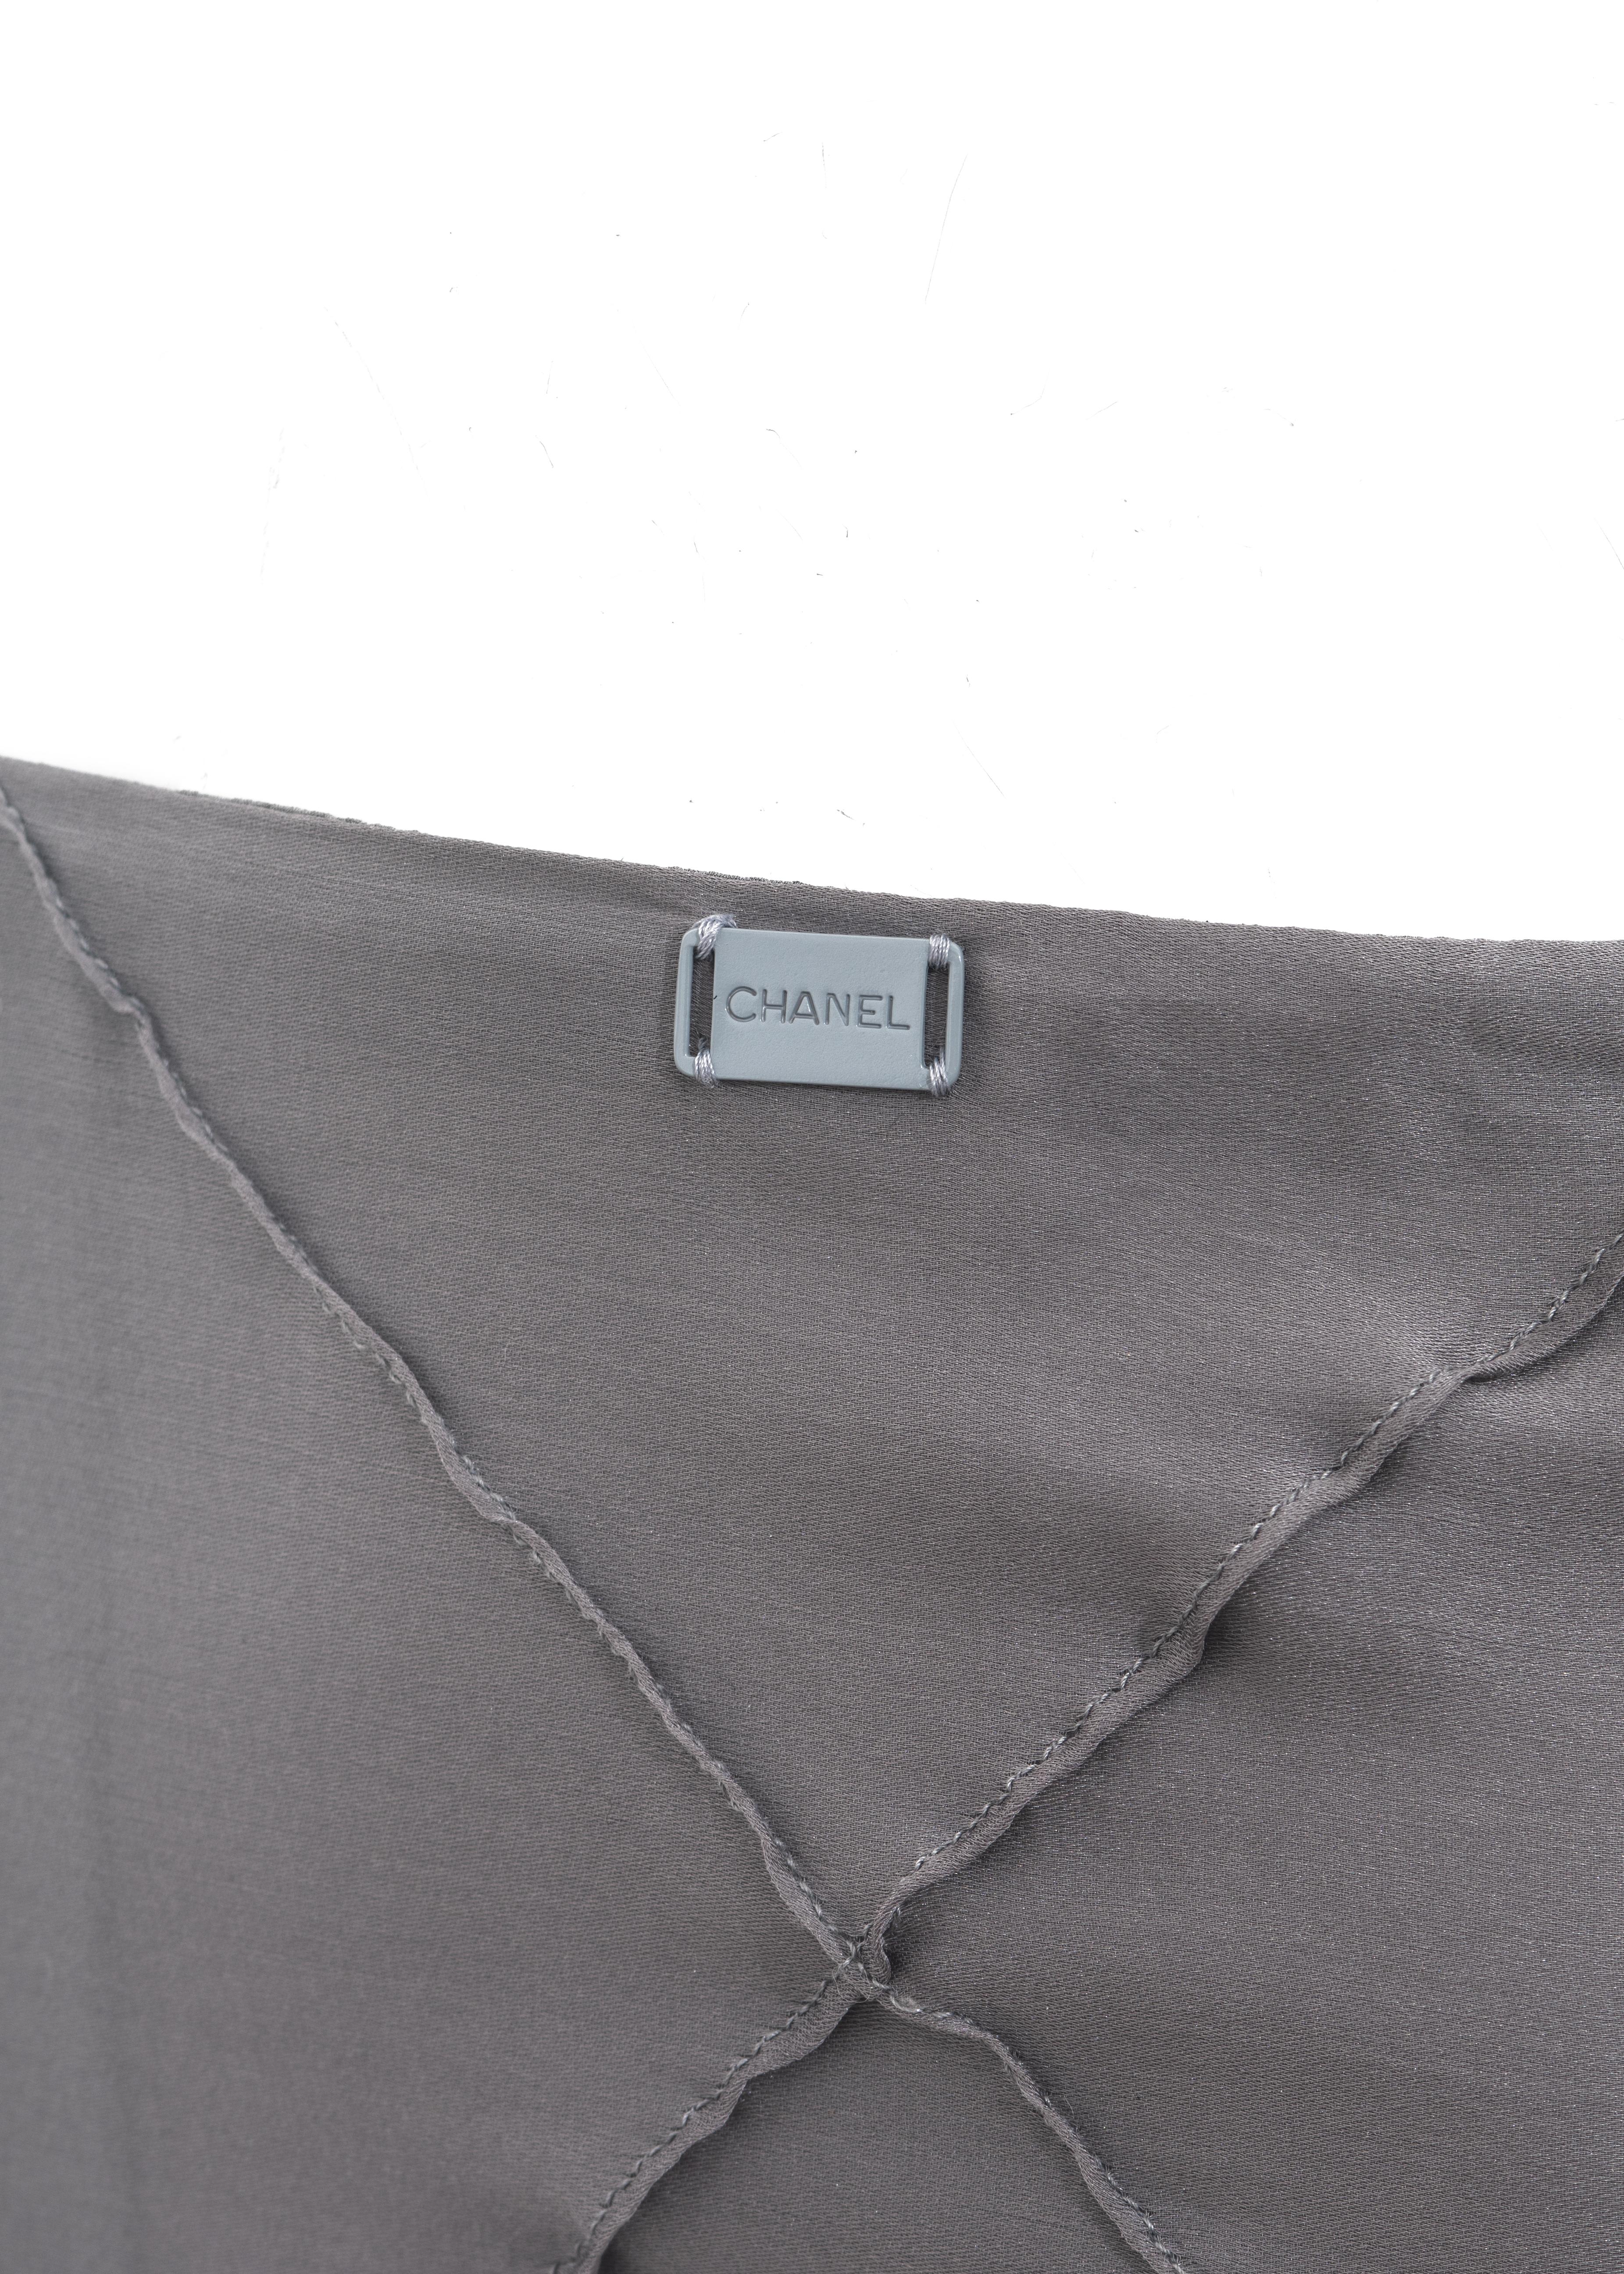 Chanel by Karl Lagerfeld grey patchwork silk trained evening skirt, ss 1999 In Excellent Condition In London, GB